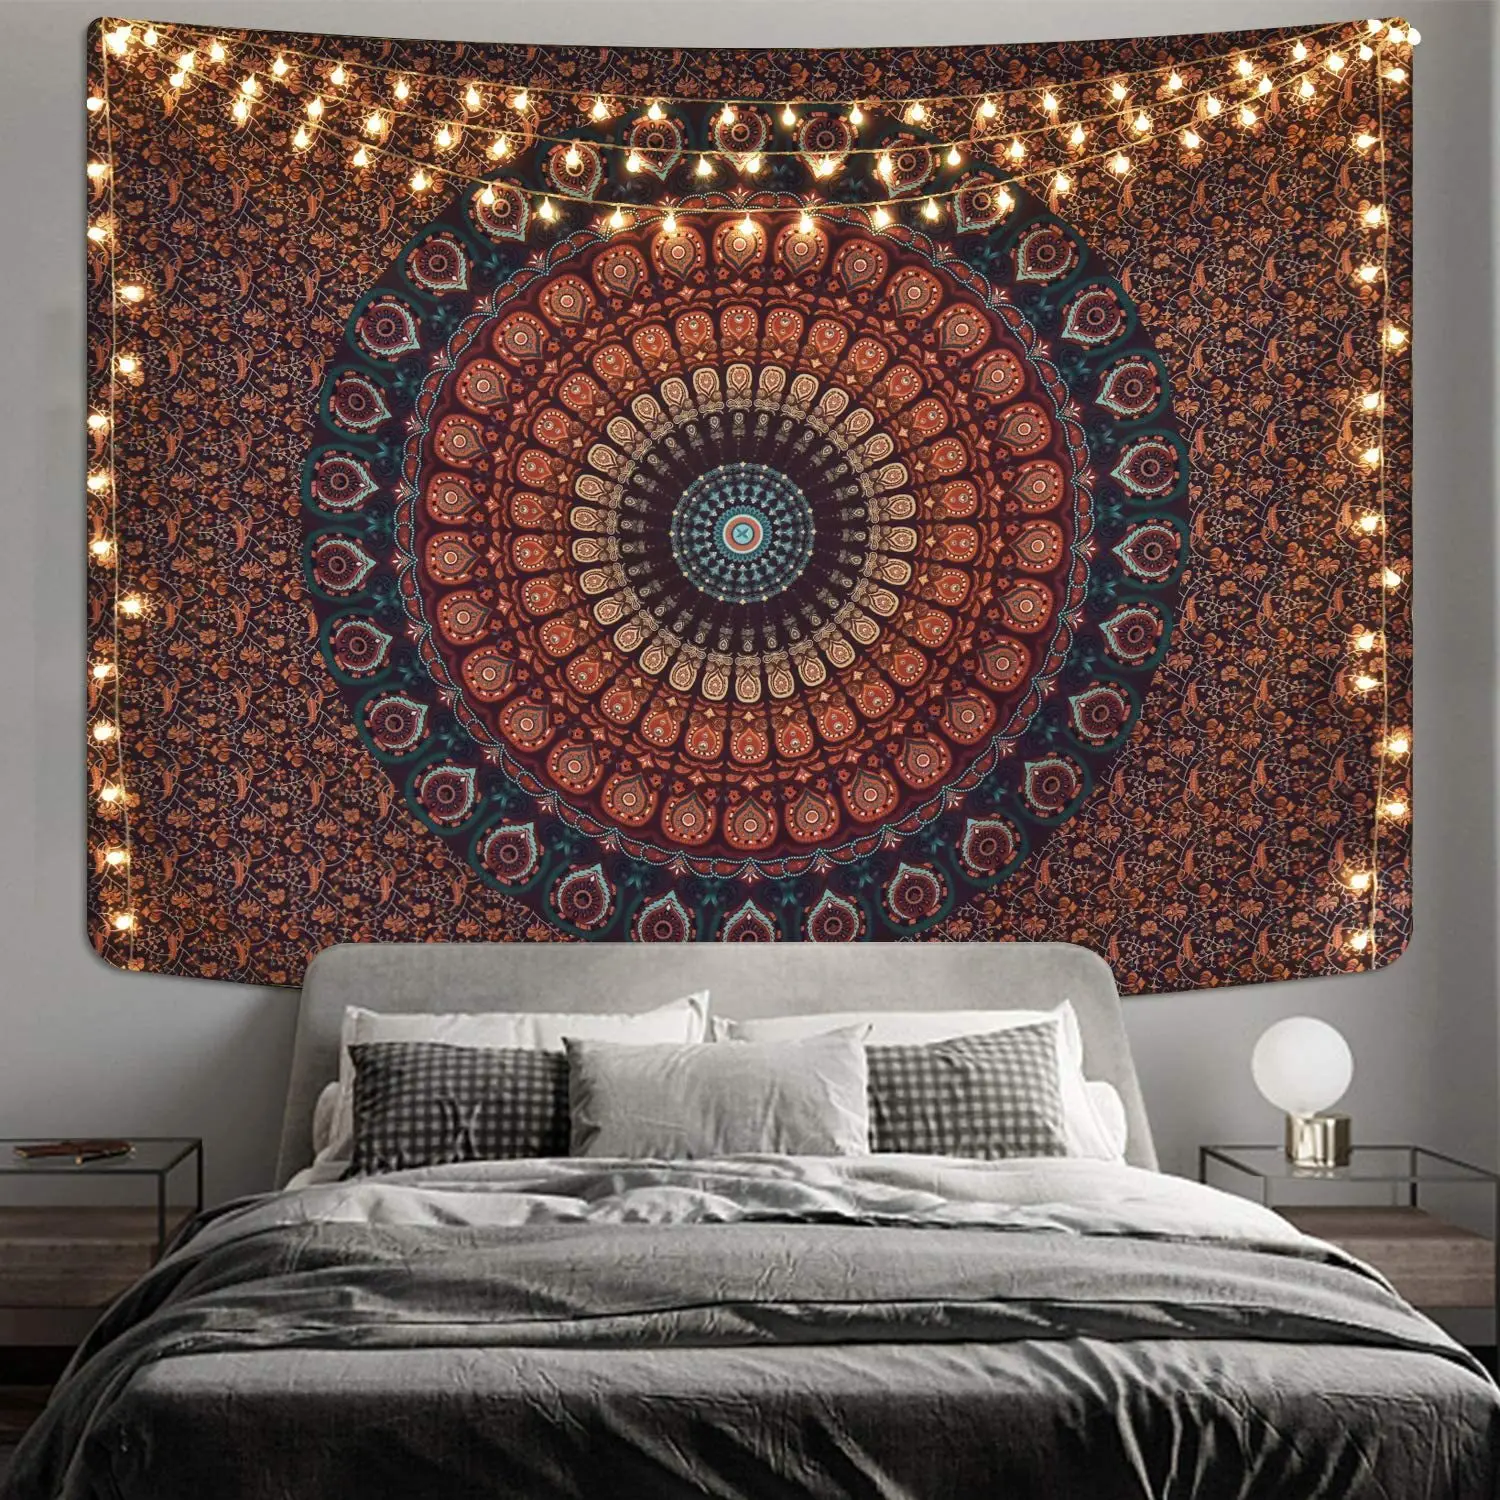 Indian Hippie Bohemian Psychedelic Peacock Mandala Wall Hanging Bedding Tapestry 